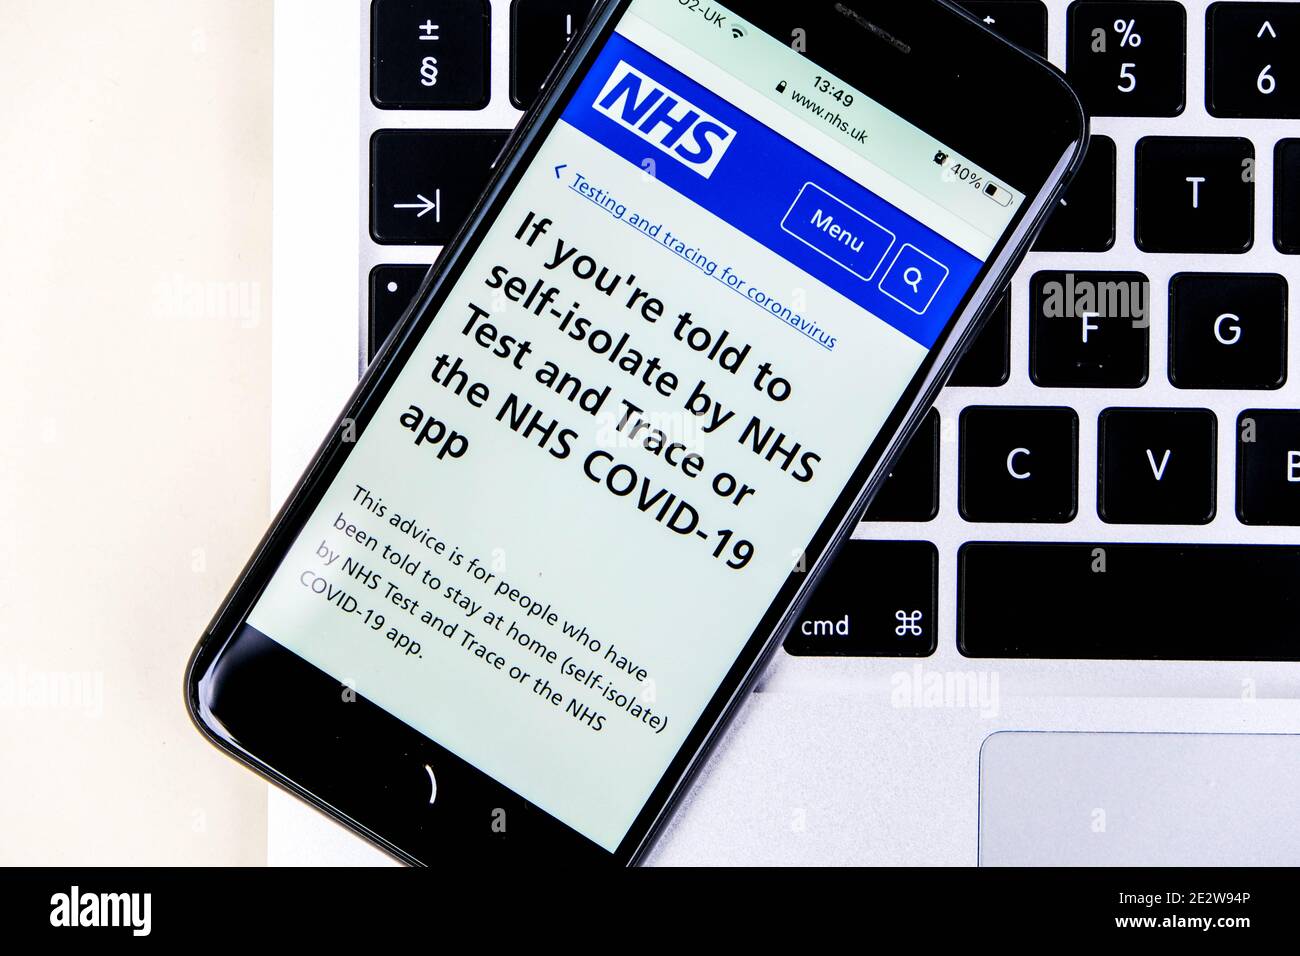 London UK, January 15 2021,  Mobile Phone Or Smartphone Screenshot Of NHS Advice To Self-Isolate Is Covid-19 Test And Trace Is Positive Stock Photo